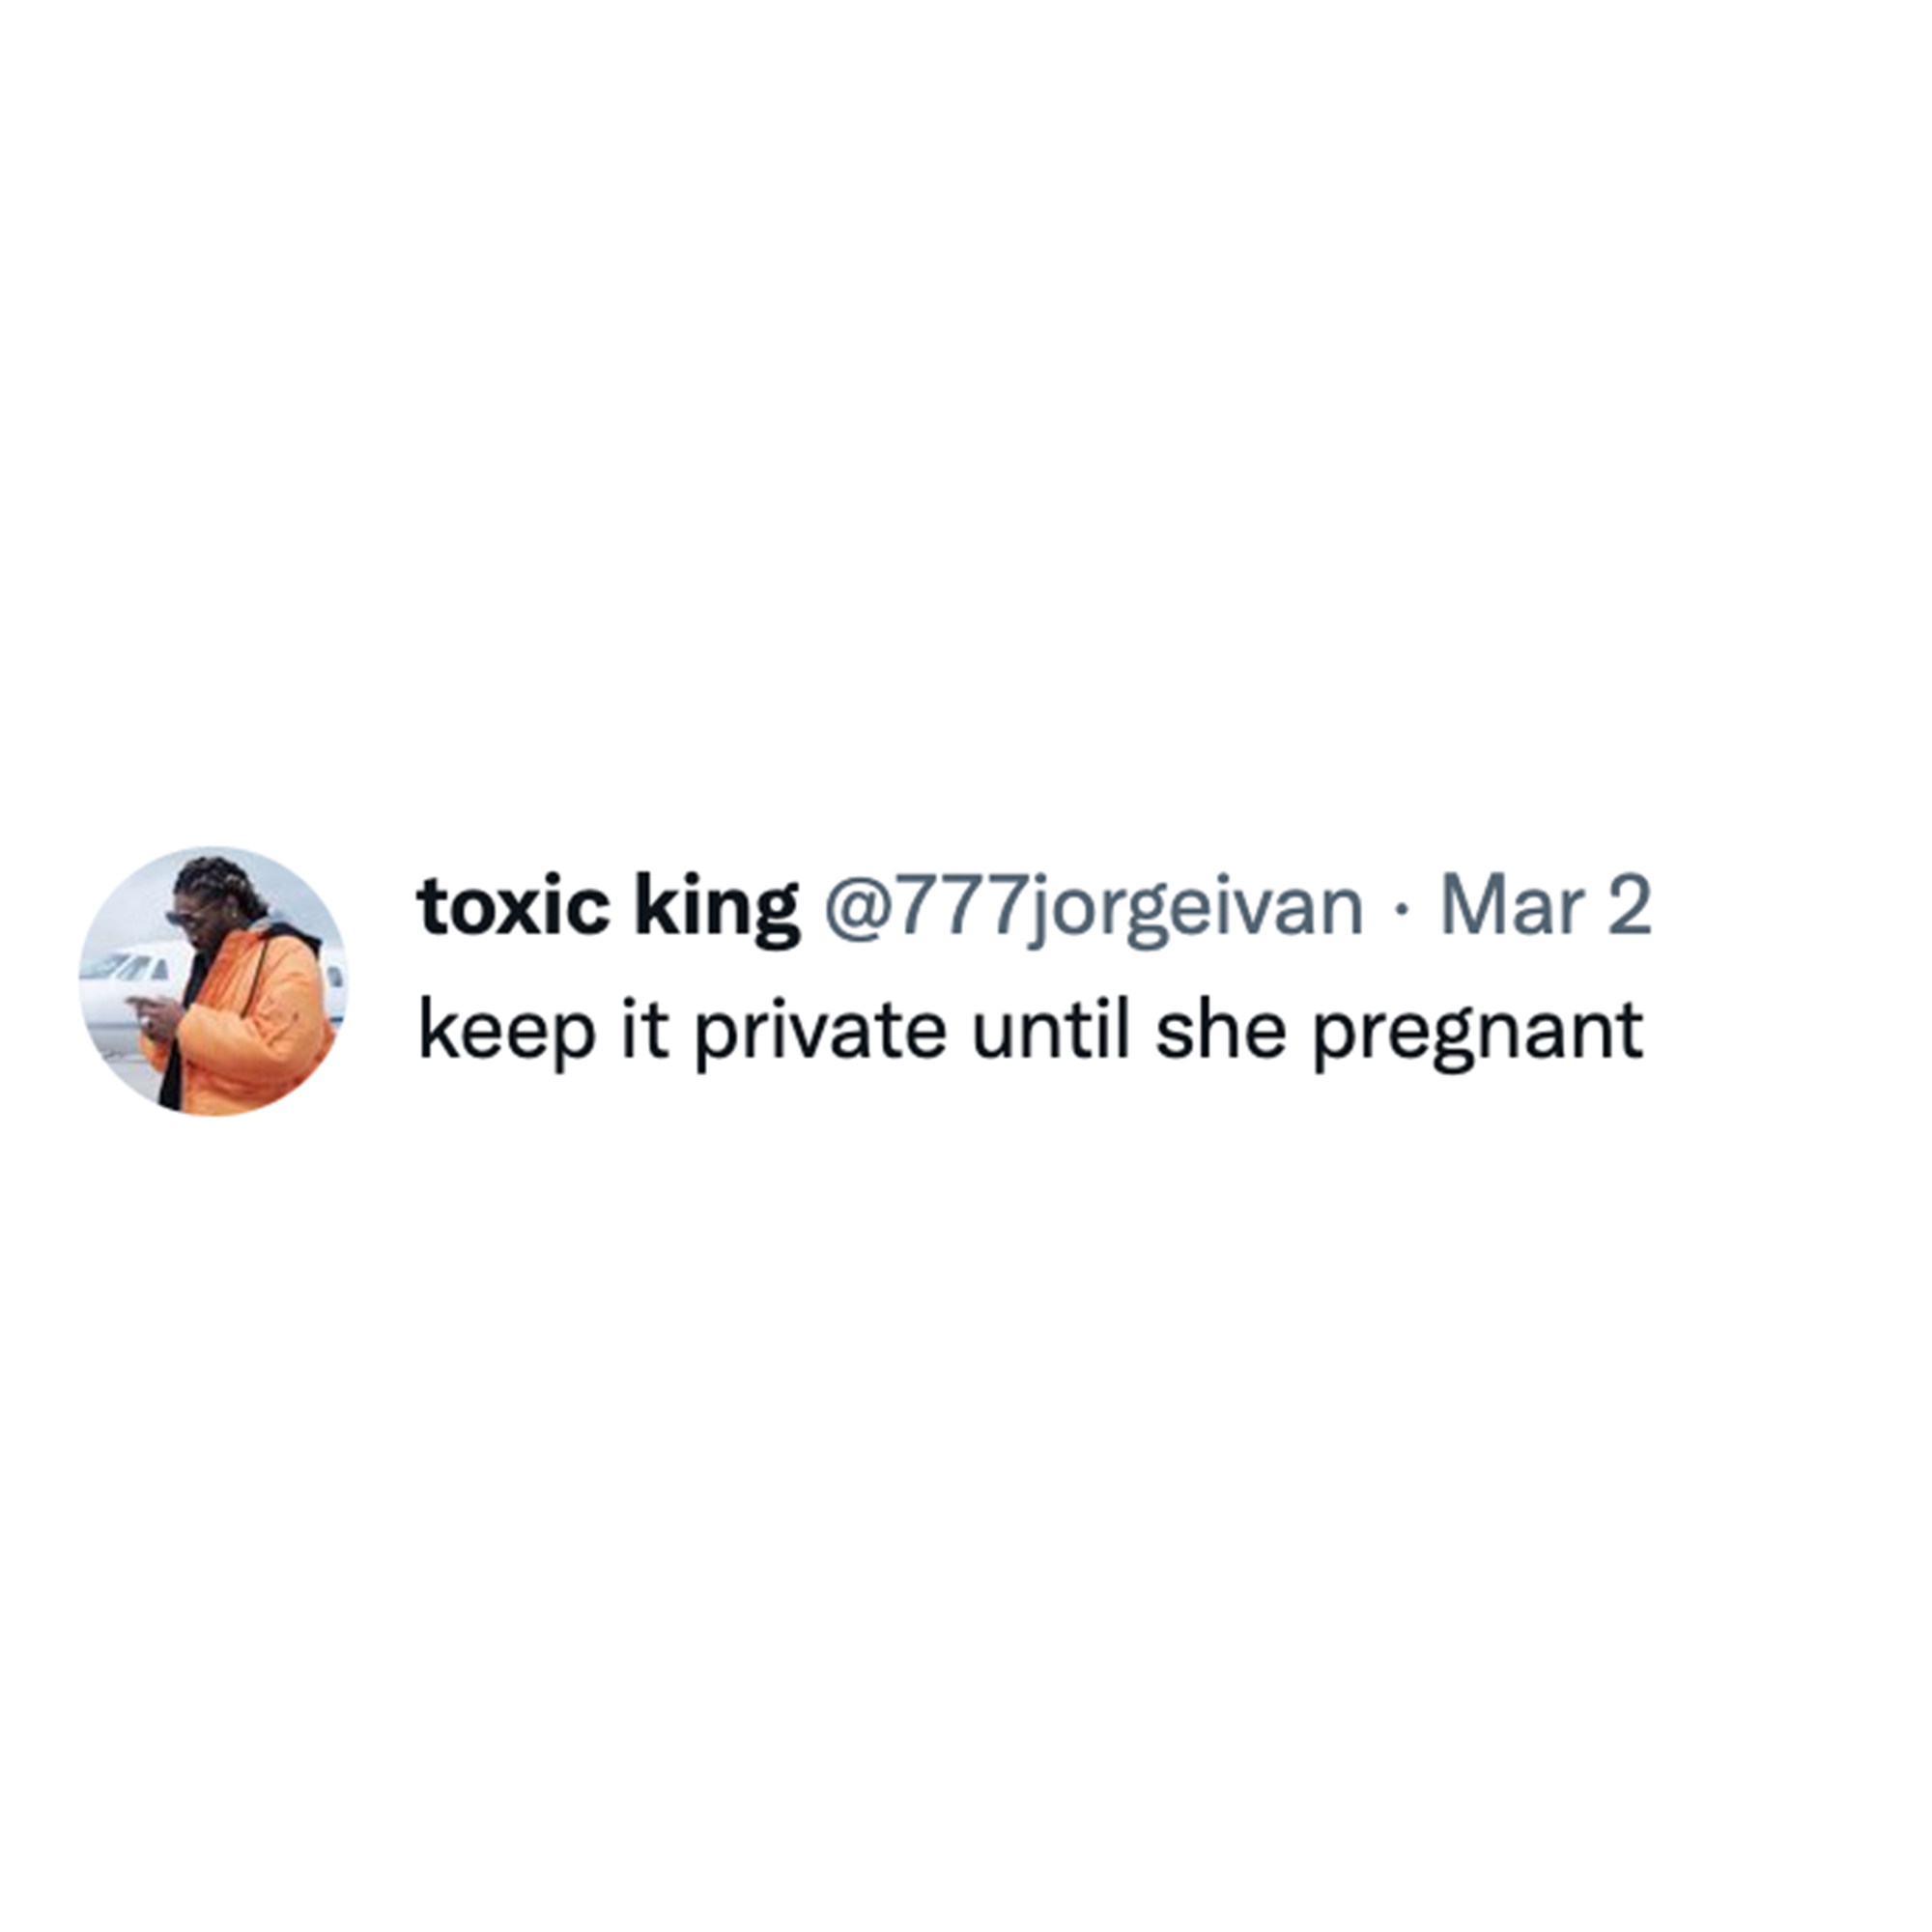 Toxic Memes and Tweets - kingston college - toxic king Mar 2 keep it private until she pregnant